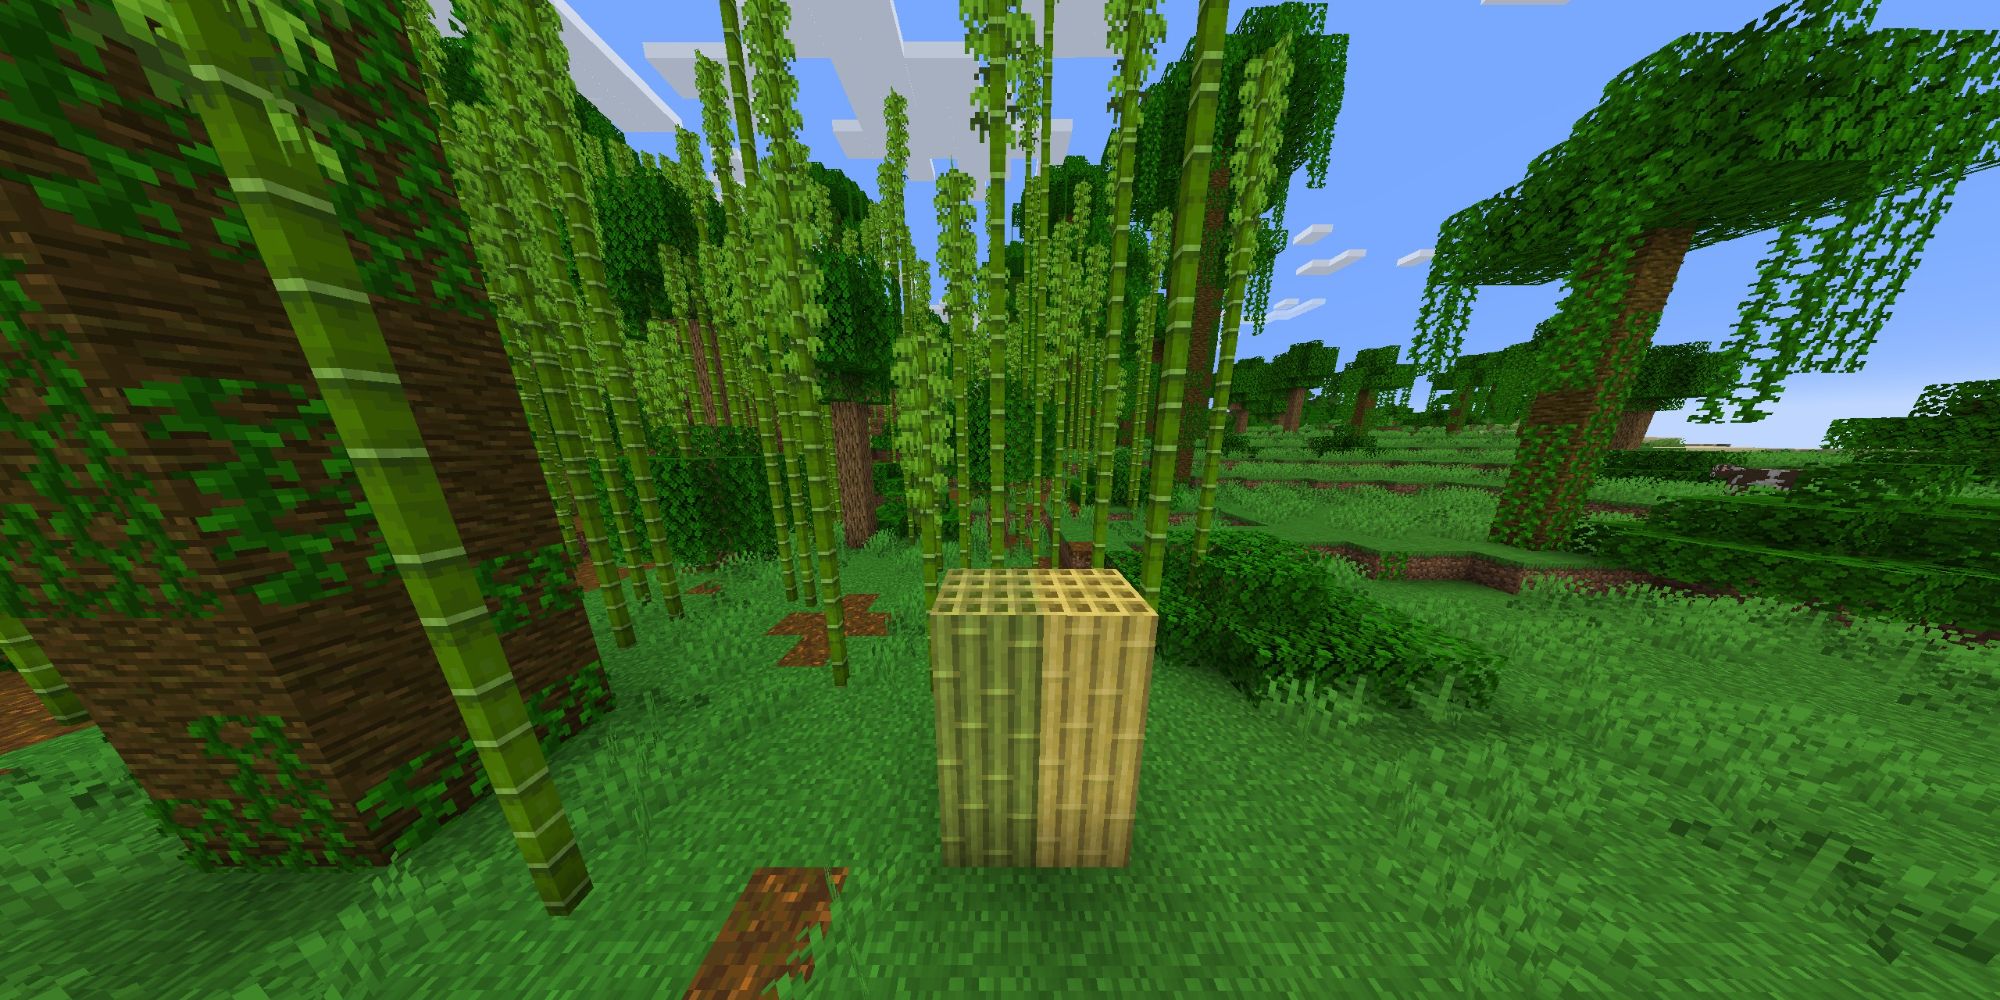 An image from Minecraft of two Bamboo Blocks. These blocks can be crafted out of bamboo shoots, which are collected from jungle biomes or a bamboo forest. 